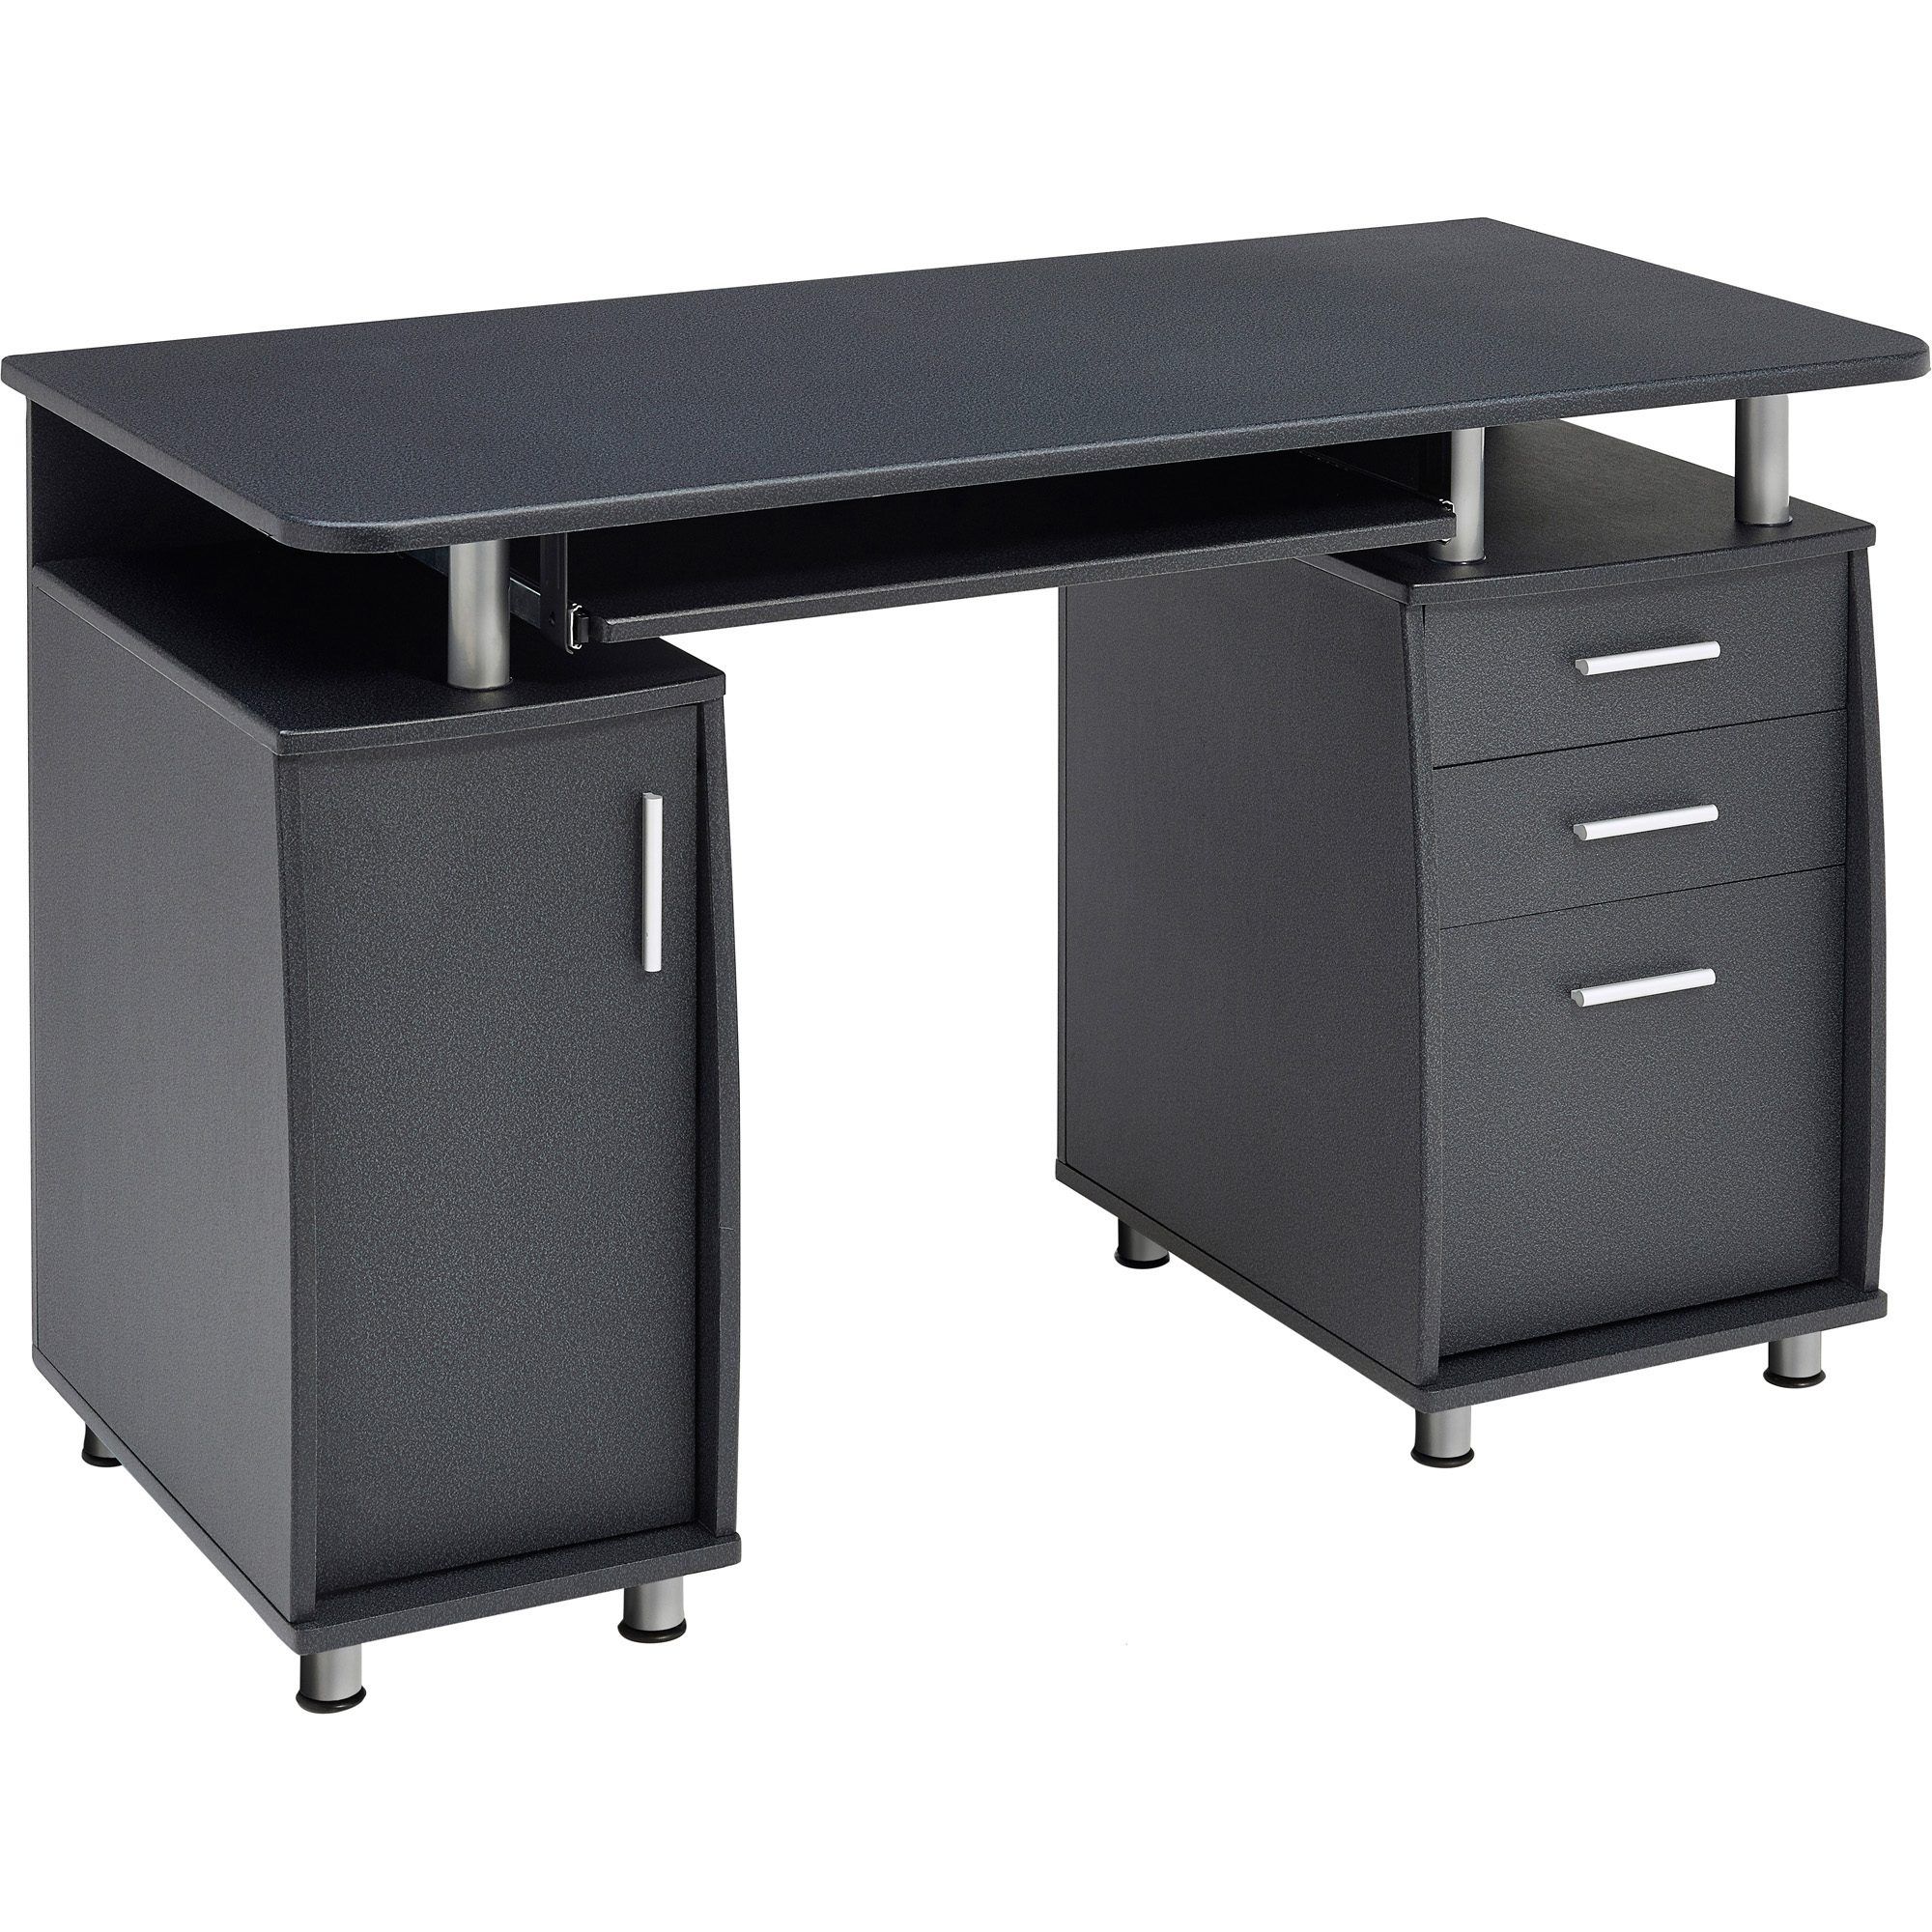 Emperor Desk With Cupboard & Drawers Graphite Black With Graphite Convertible Desks With Keyboard Shelf (View 6 of 15)